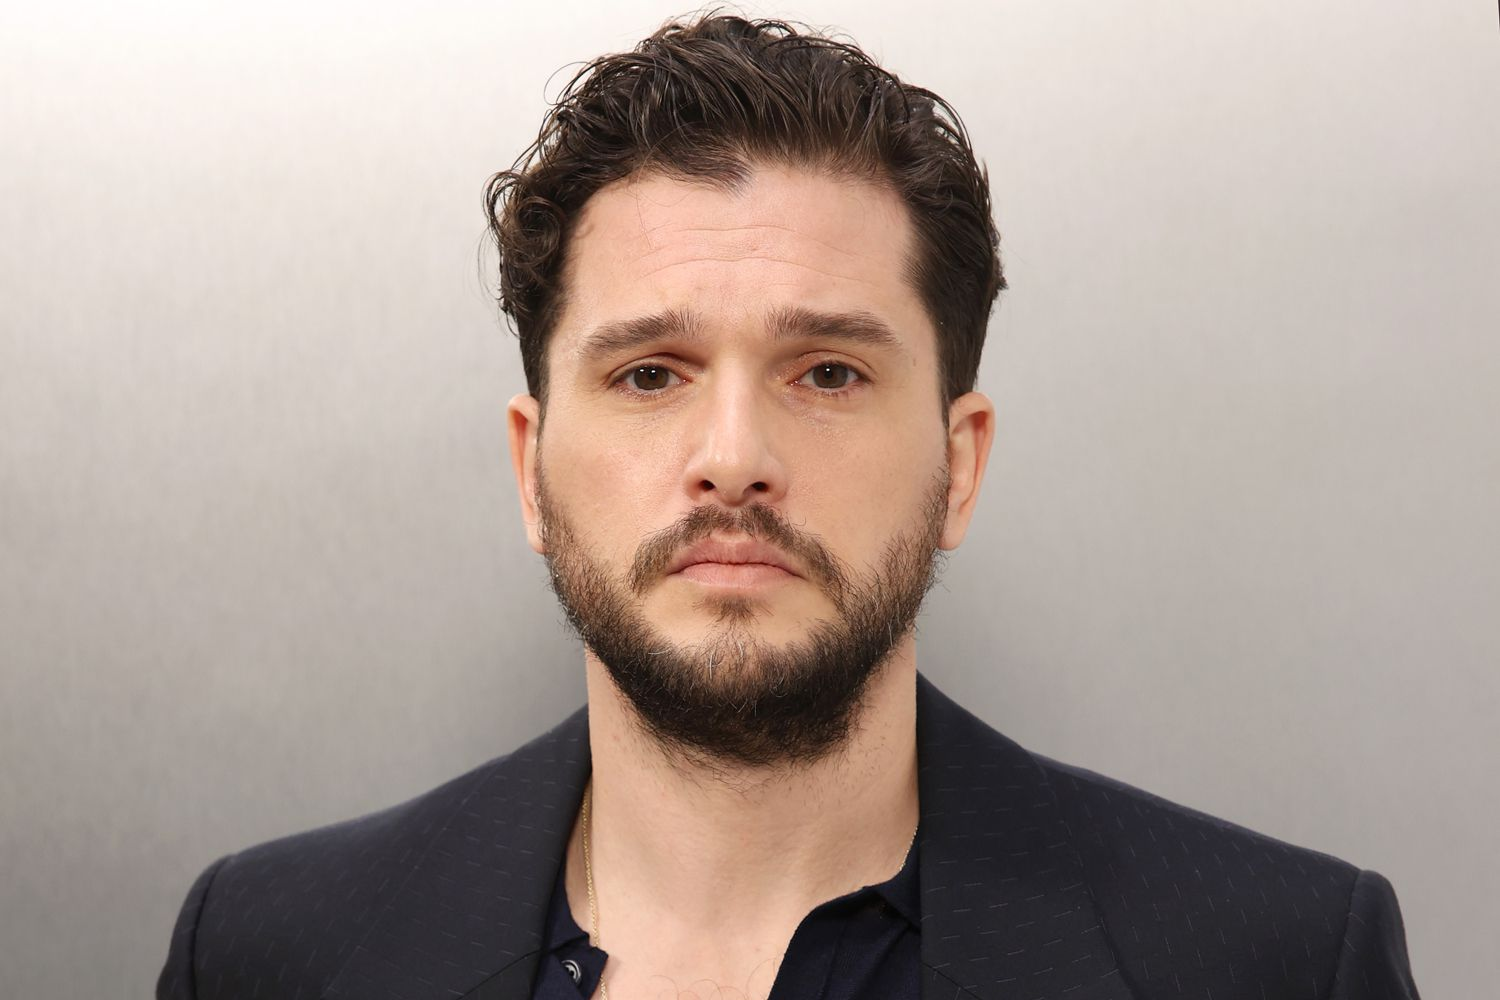 Kit Harington Biography: Movies, Wife, Age, TV Shows, Net Worth, Children, Instagram, Relationships, Siblings